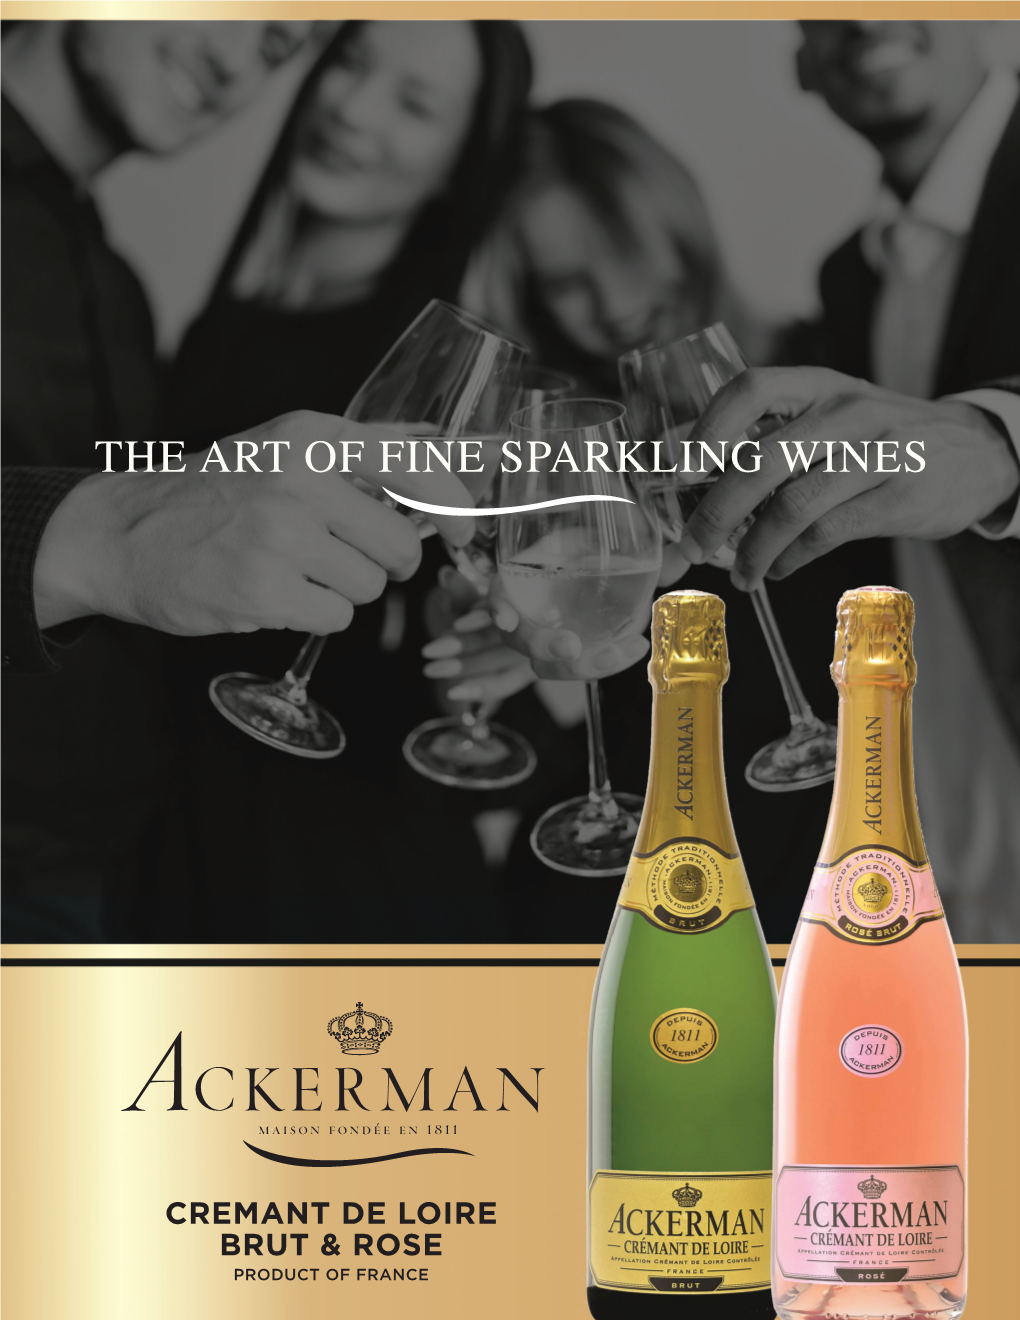 The Art of Fine Sparkling Wines